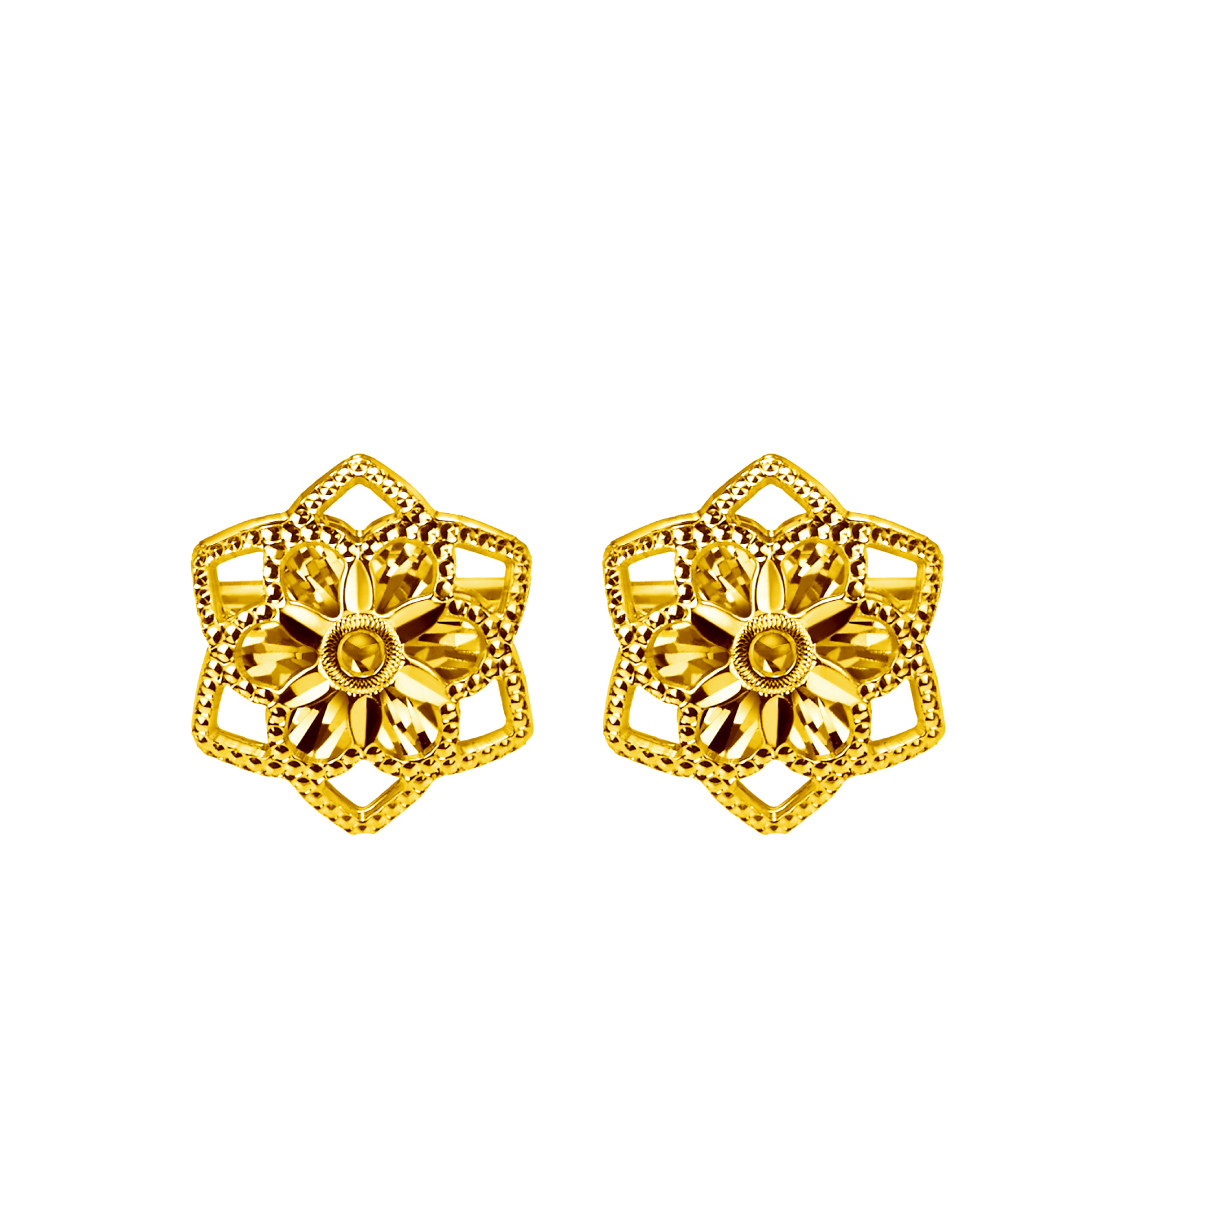 Goldstyle "Floral Beauty" Gold Earrings